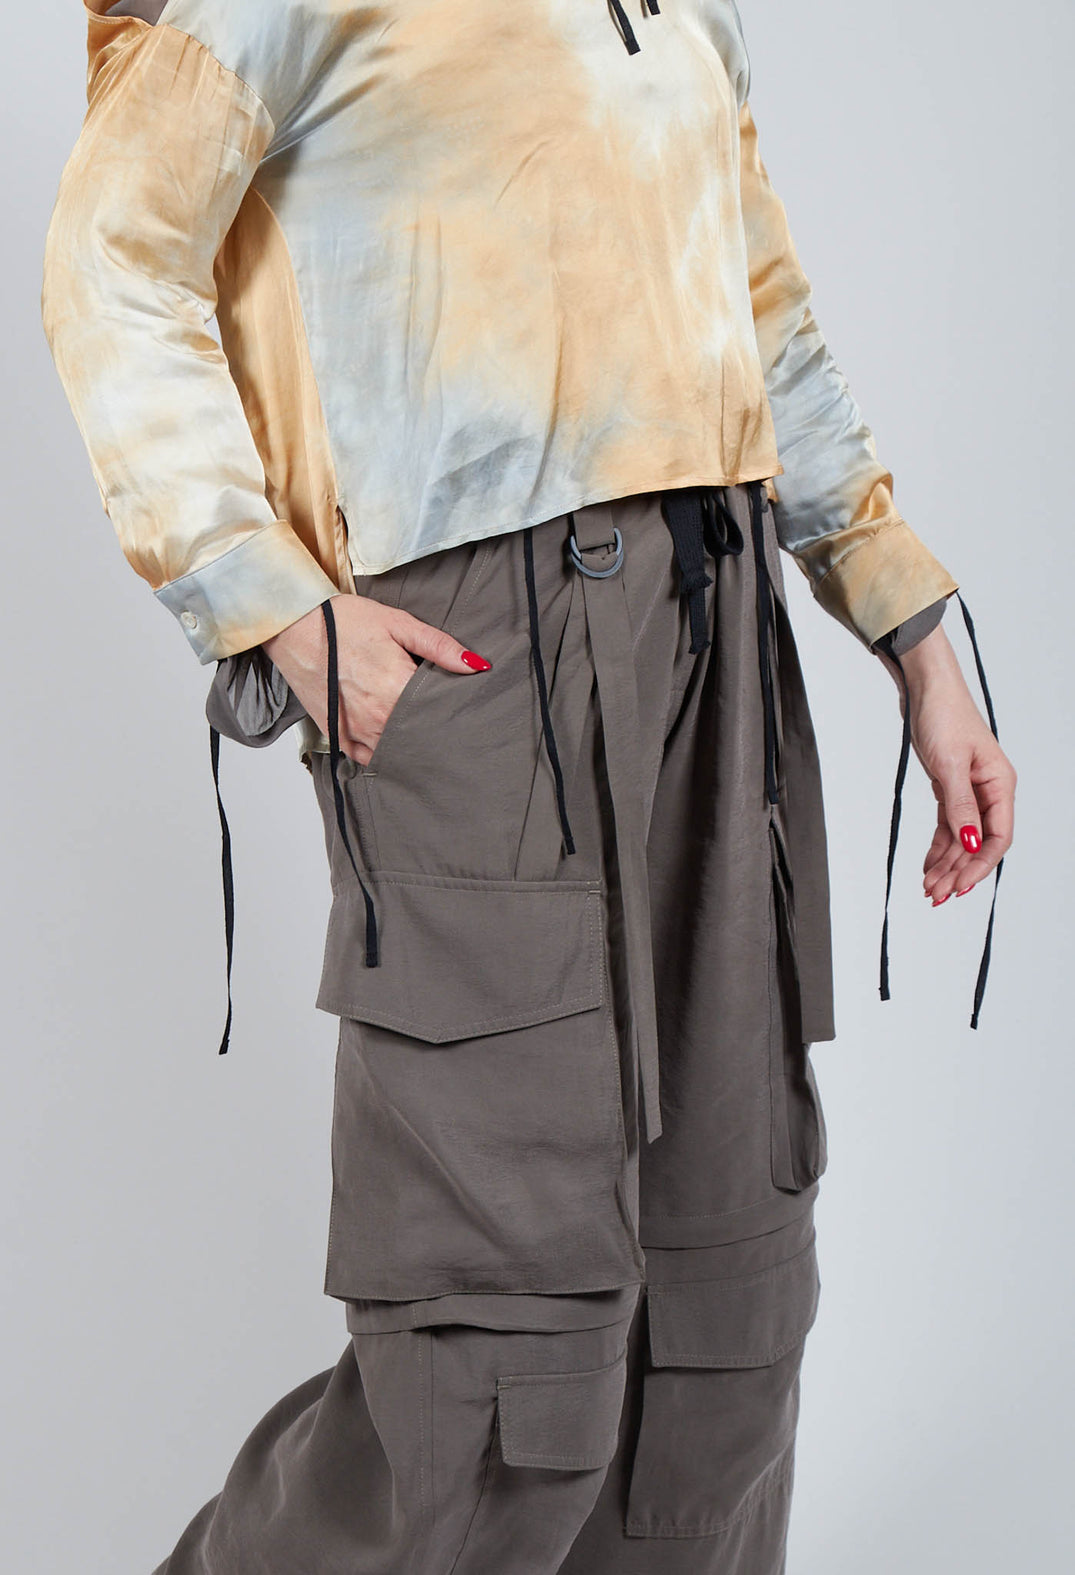 Trousers in Mud